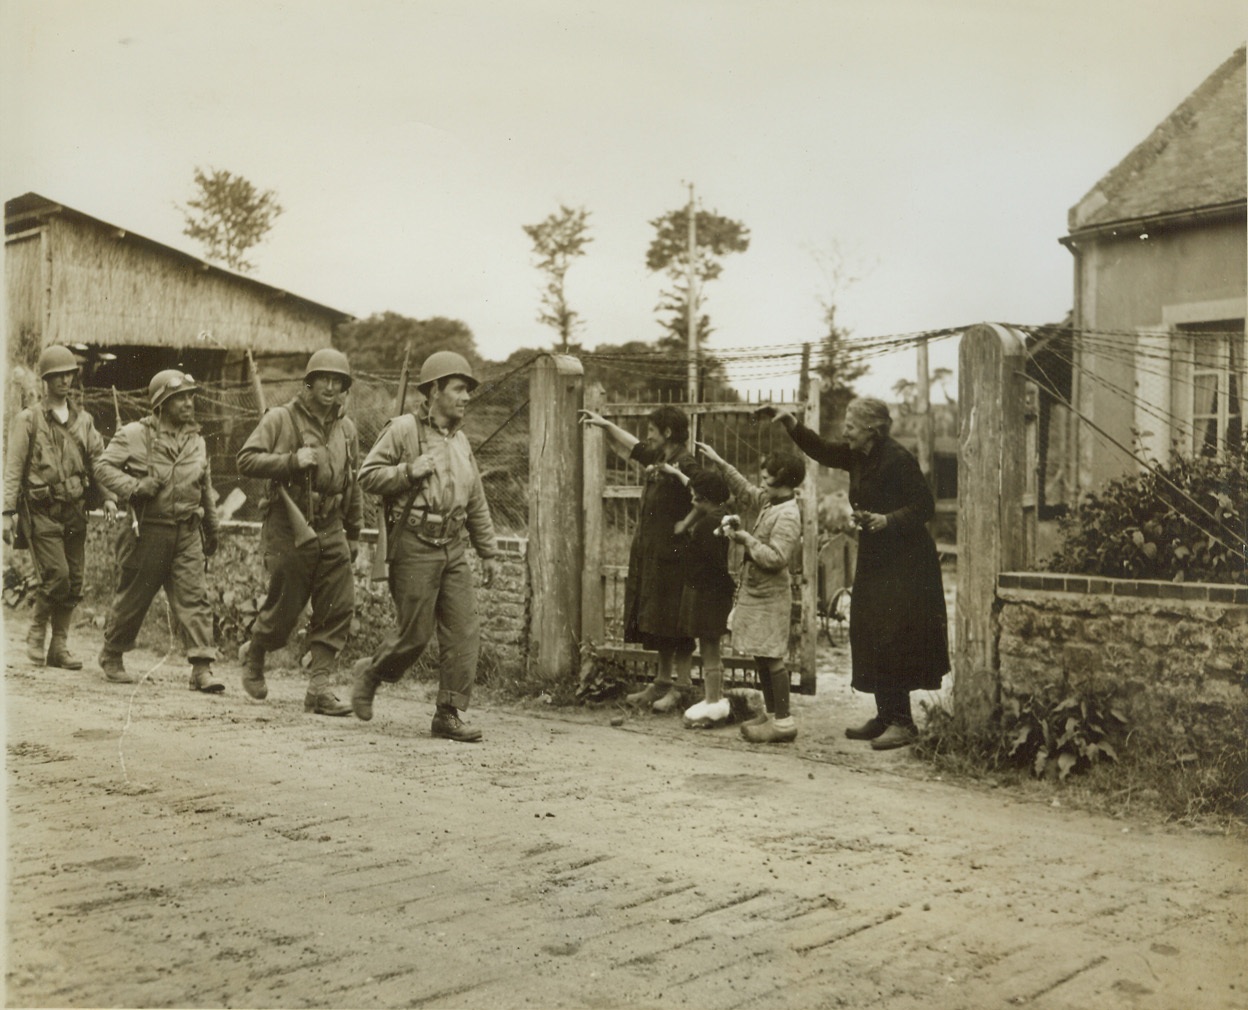 Liberators Are Welcome, 6/13/1944. France—Four female members of a French family stand by the gate of their modest farmhouse to offer a cheerful welcome to American infantrymen passing through the liberated village. The two little girls hold gifts of flowers for the liberators. Credit: ACME photo by Bert Brandt for war pool correspondents;